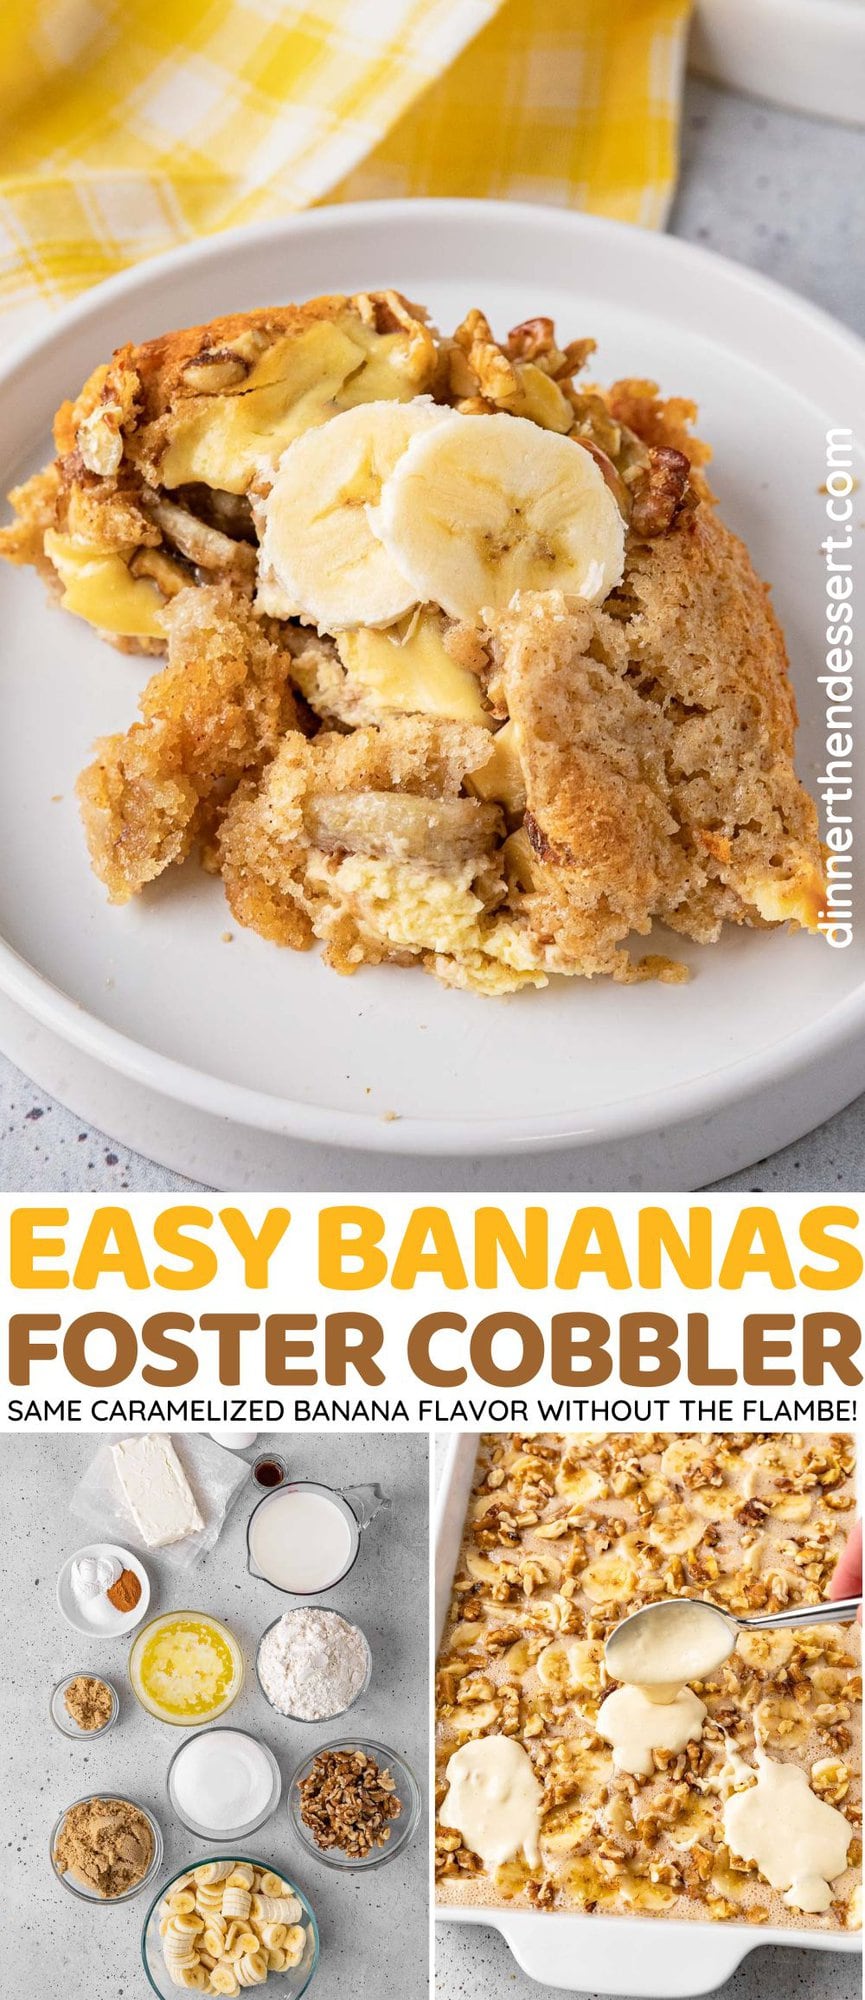 Bananas Foster Cobbler baked portion on plate and preparation collage